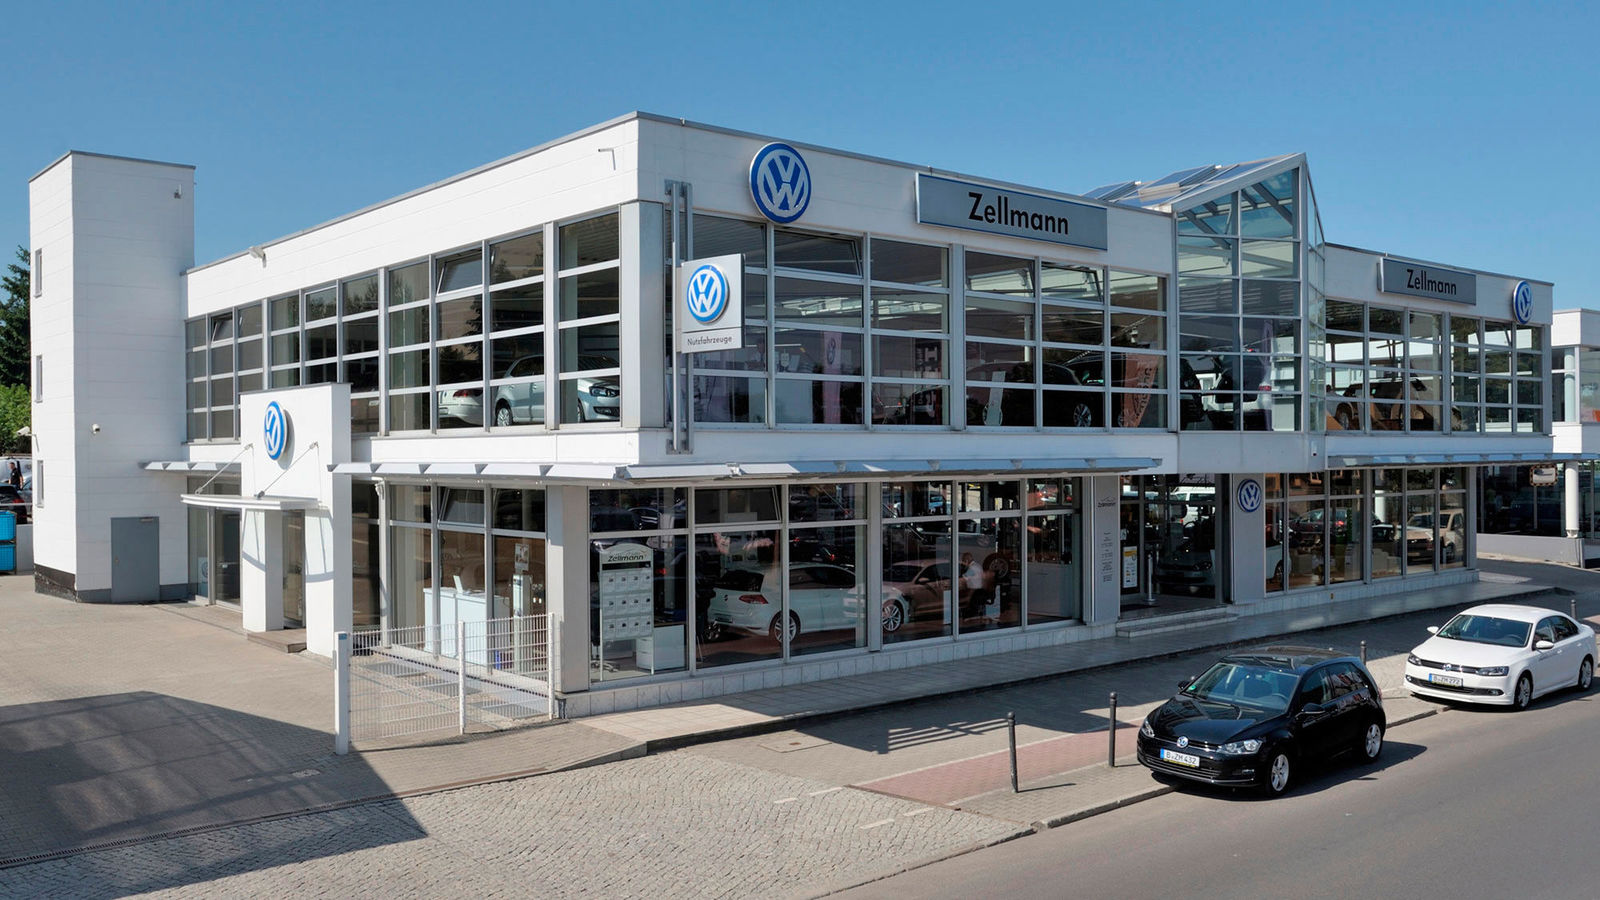 Story: "30th anniversary of the German reunification: Automaking East – a portrait of five car dealerships"